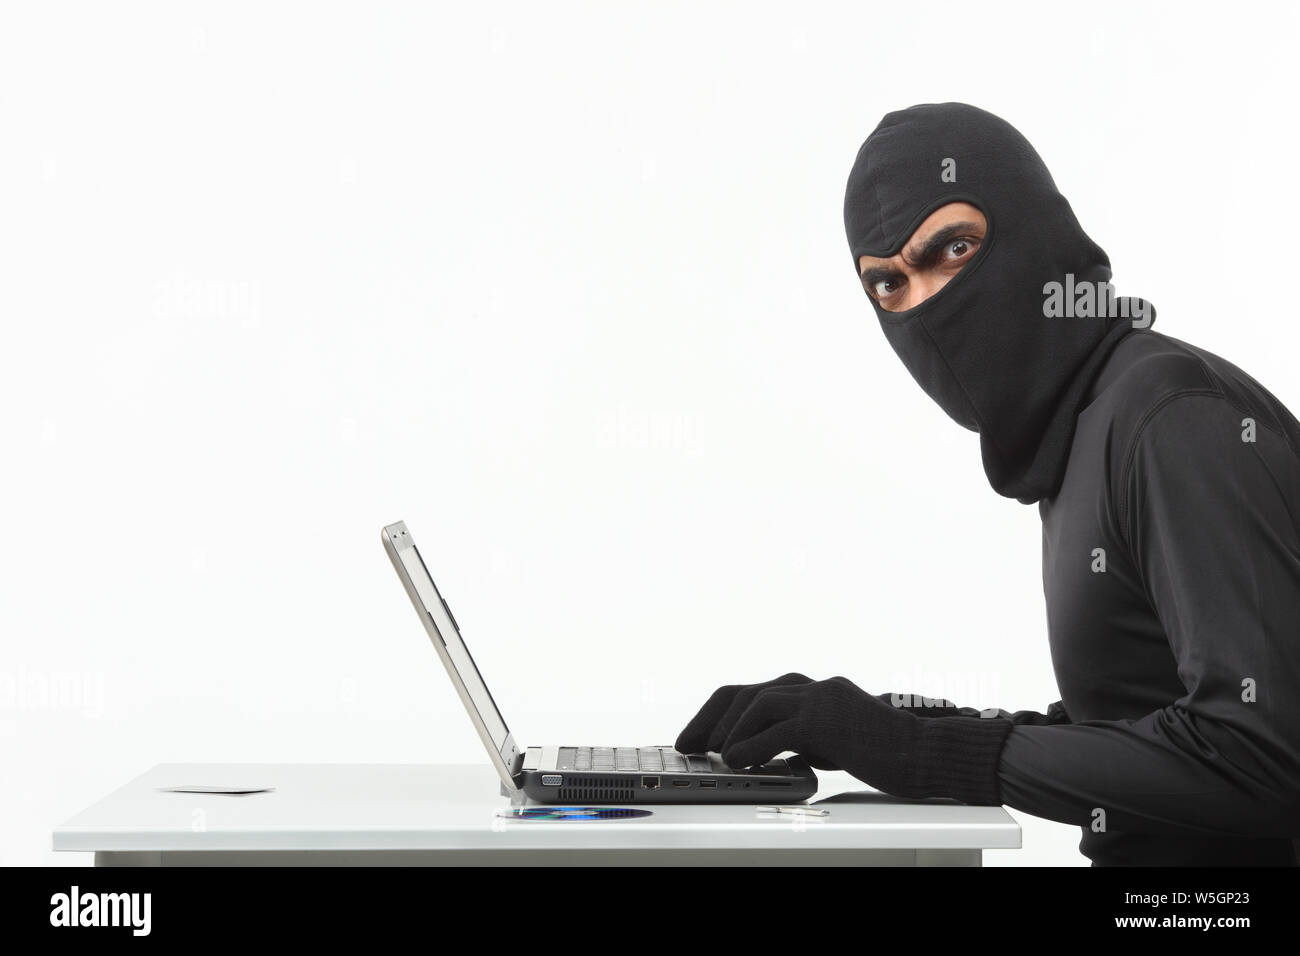 Hacker stealing information from laptop Stock Photo